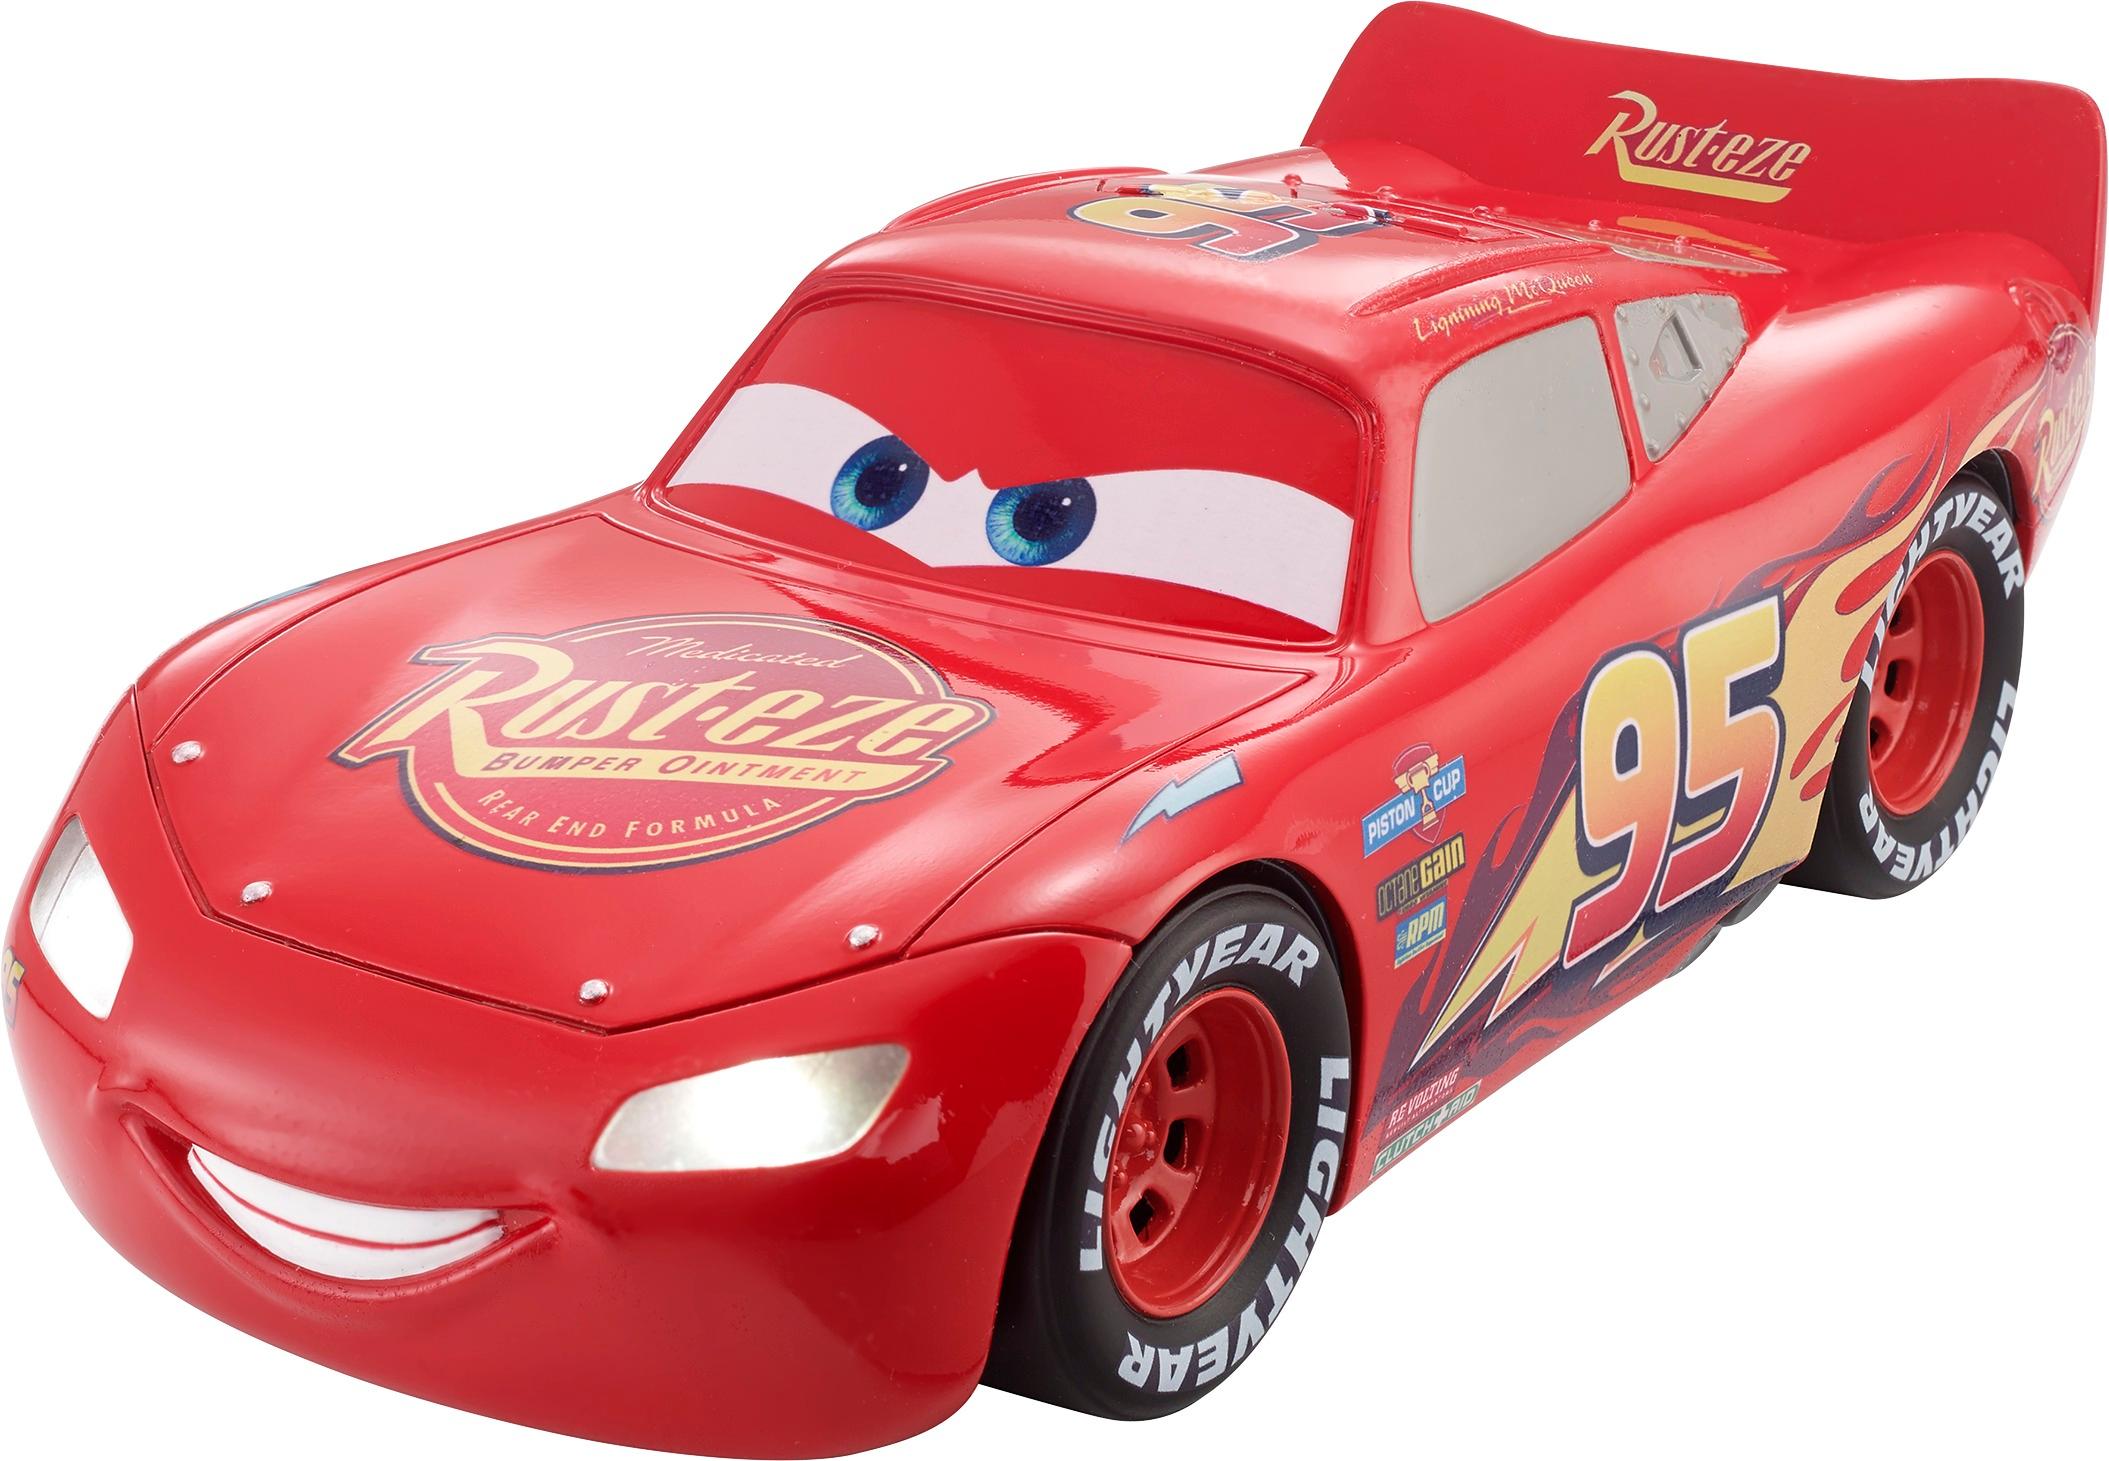 Cars 3 Toys with Lightning McQueen 